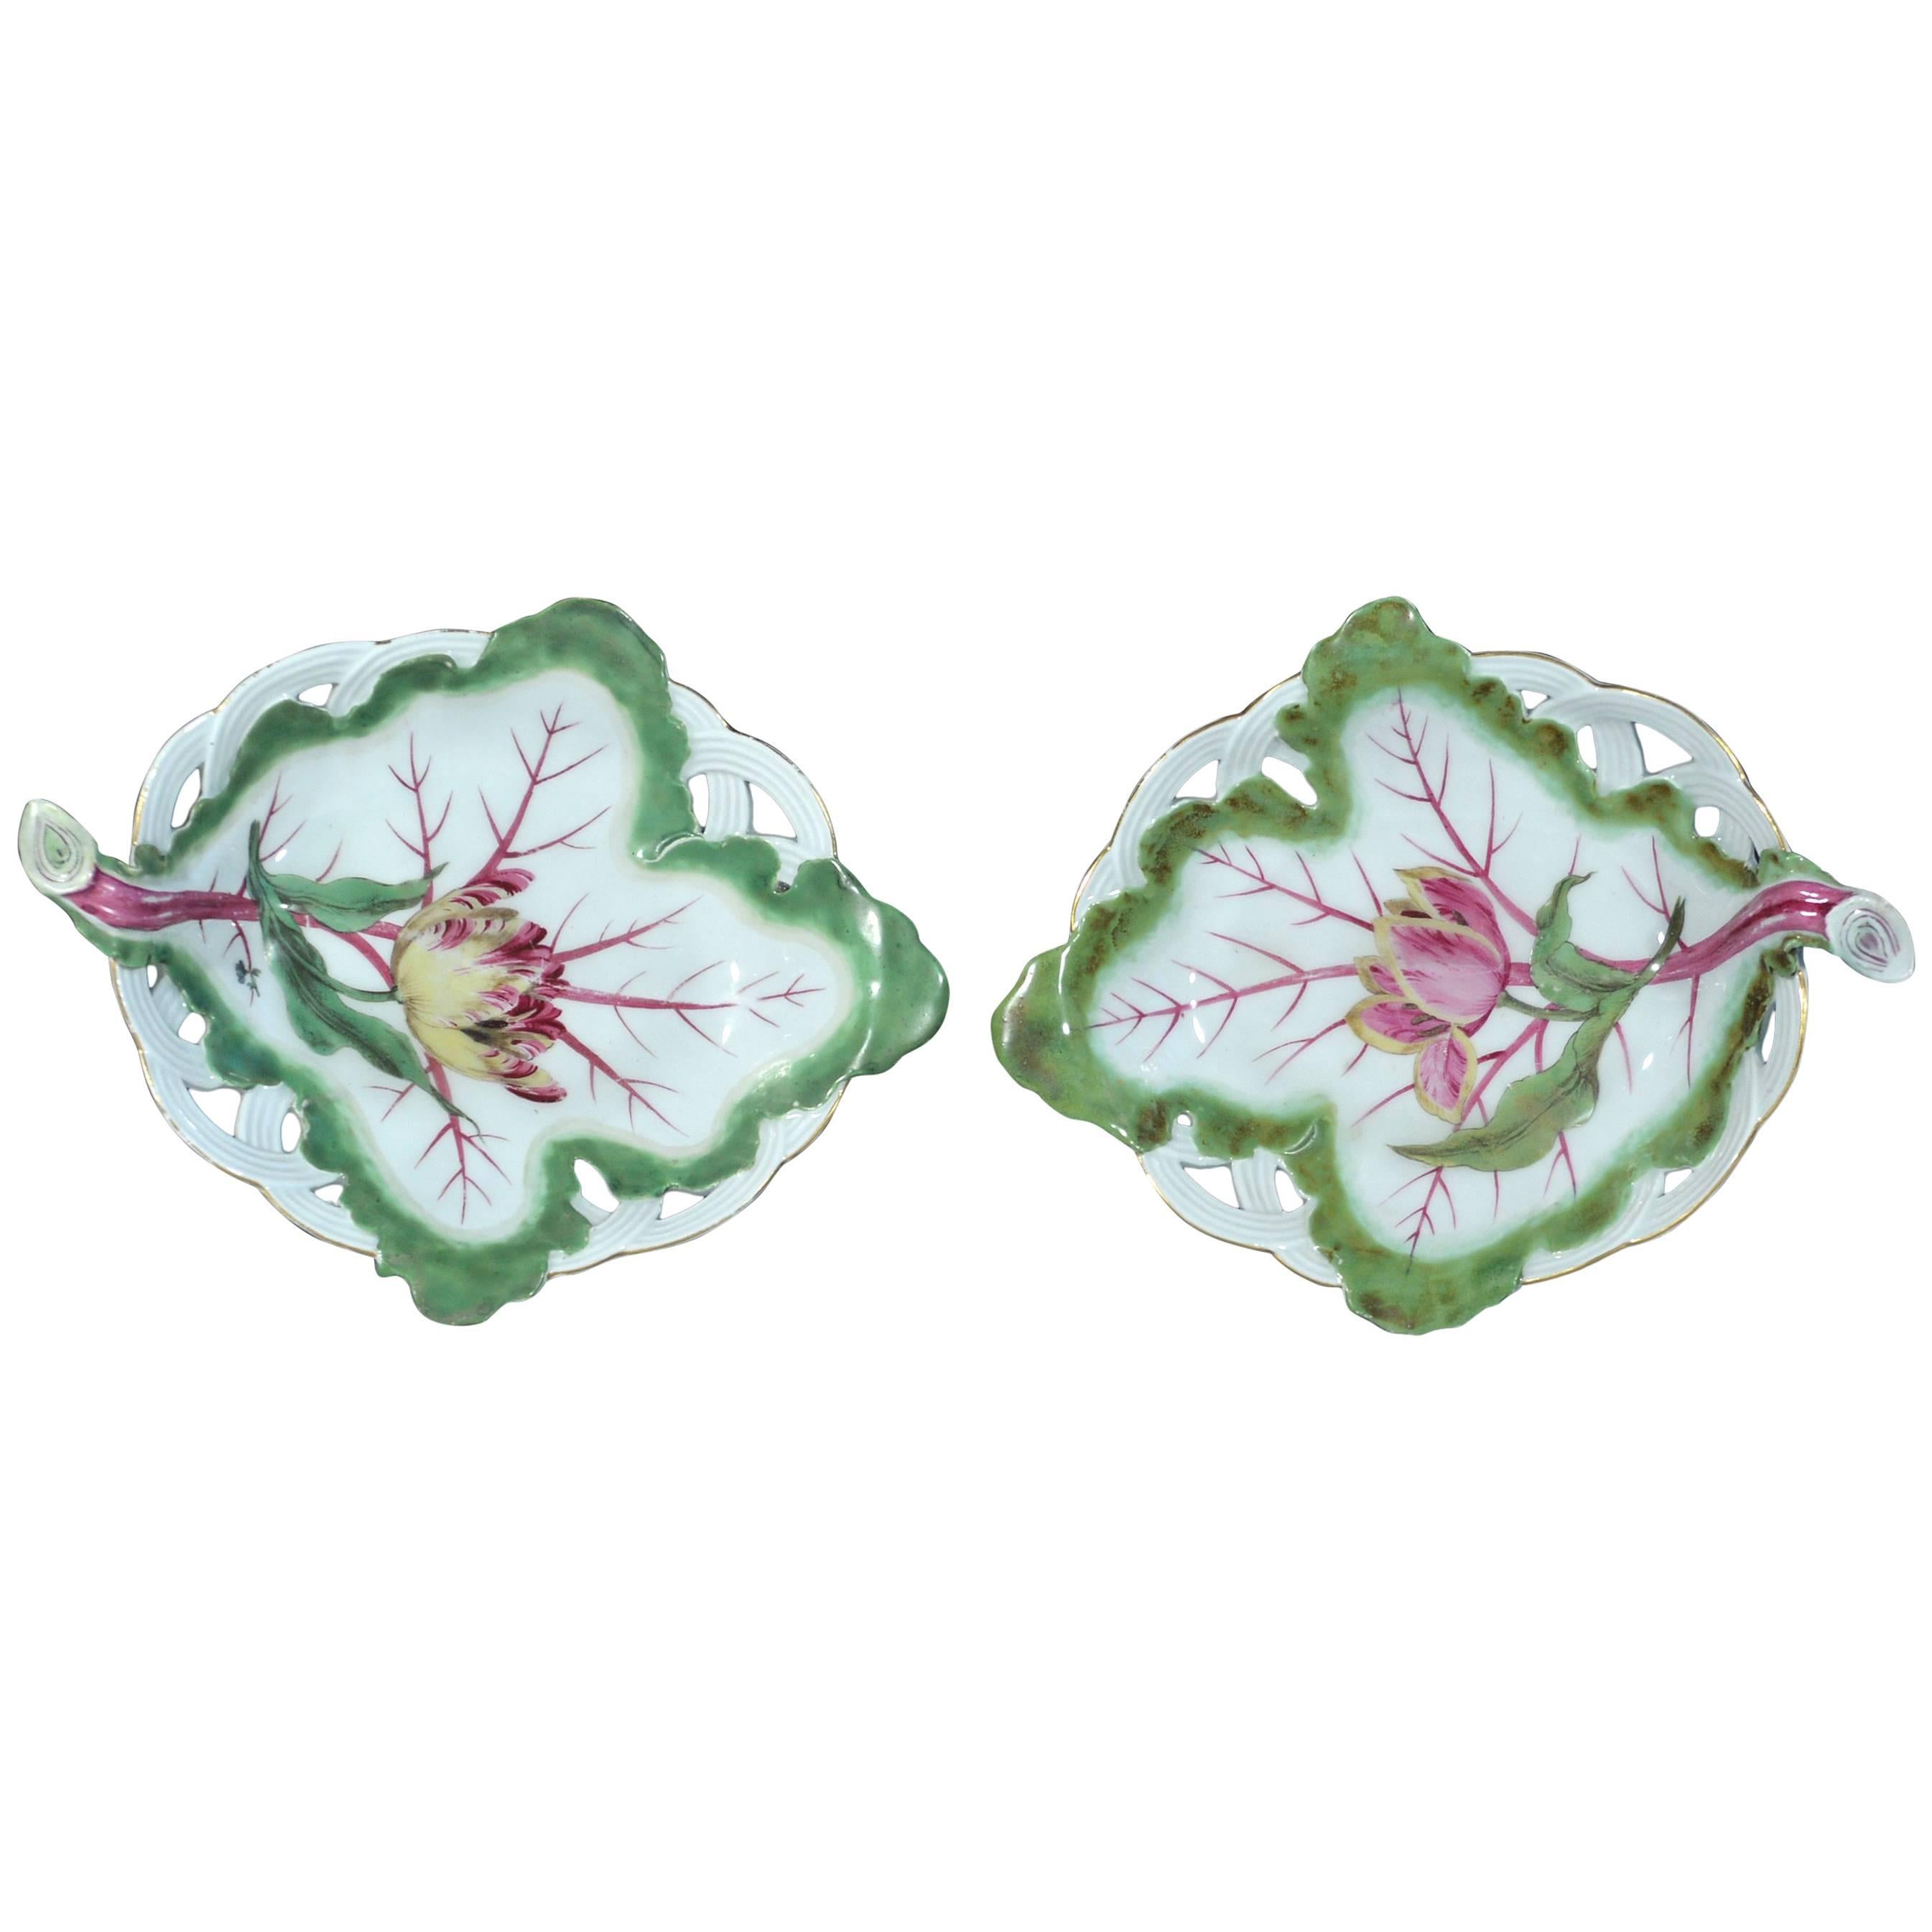 Georgian Period Chelsea Porcelain Pair of Tromp L'oeil Leaf Dishes with Tulips